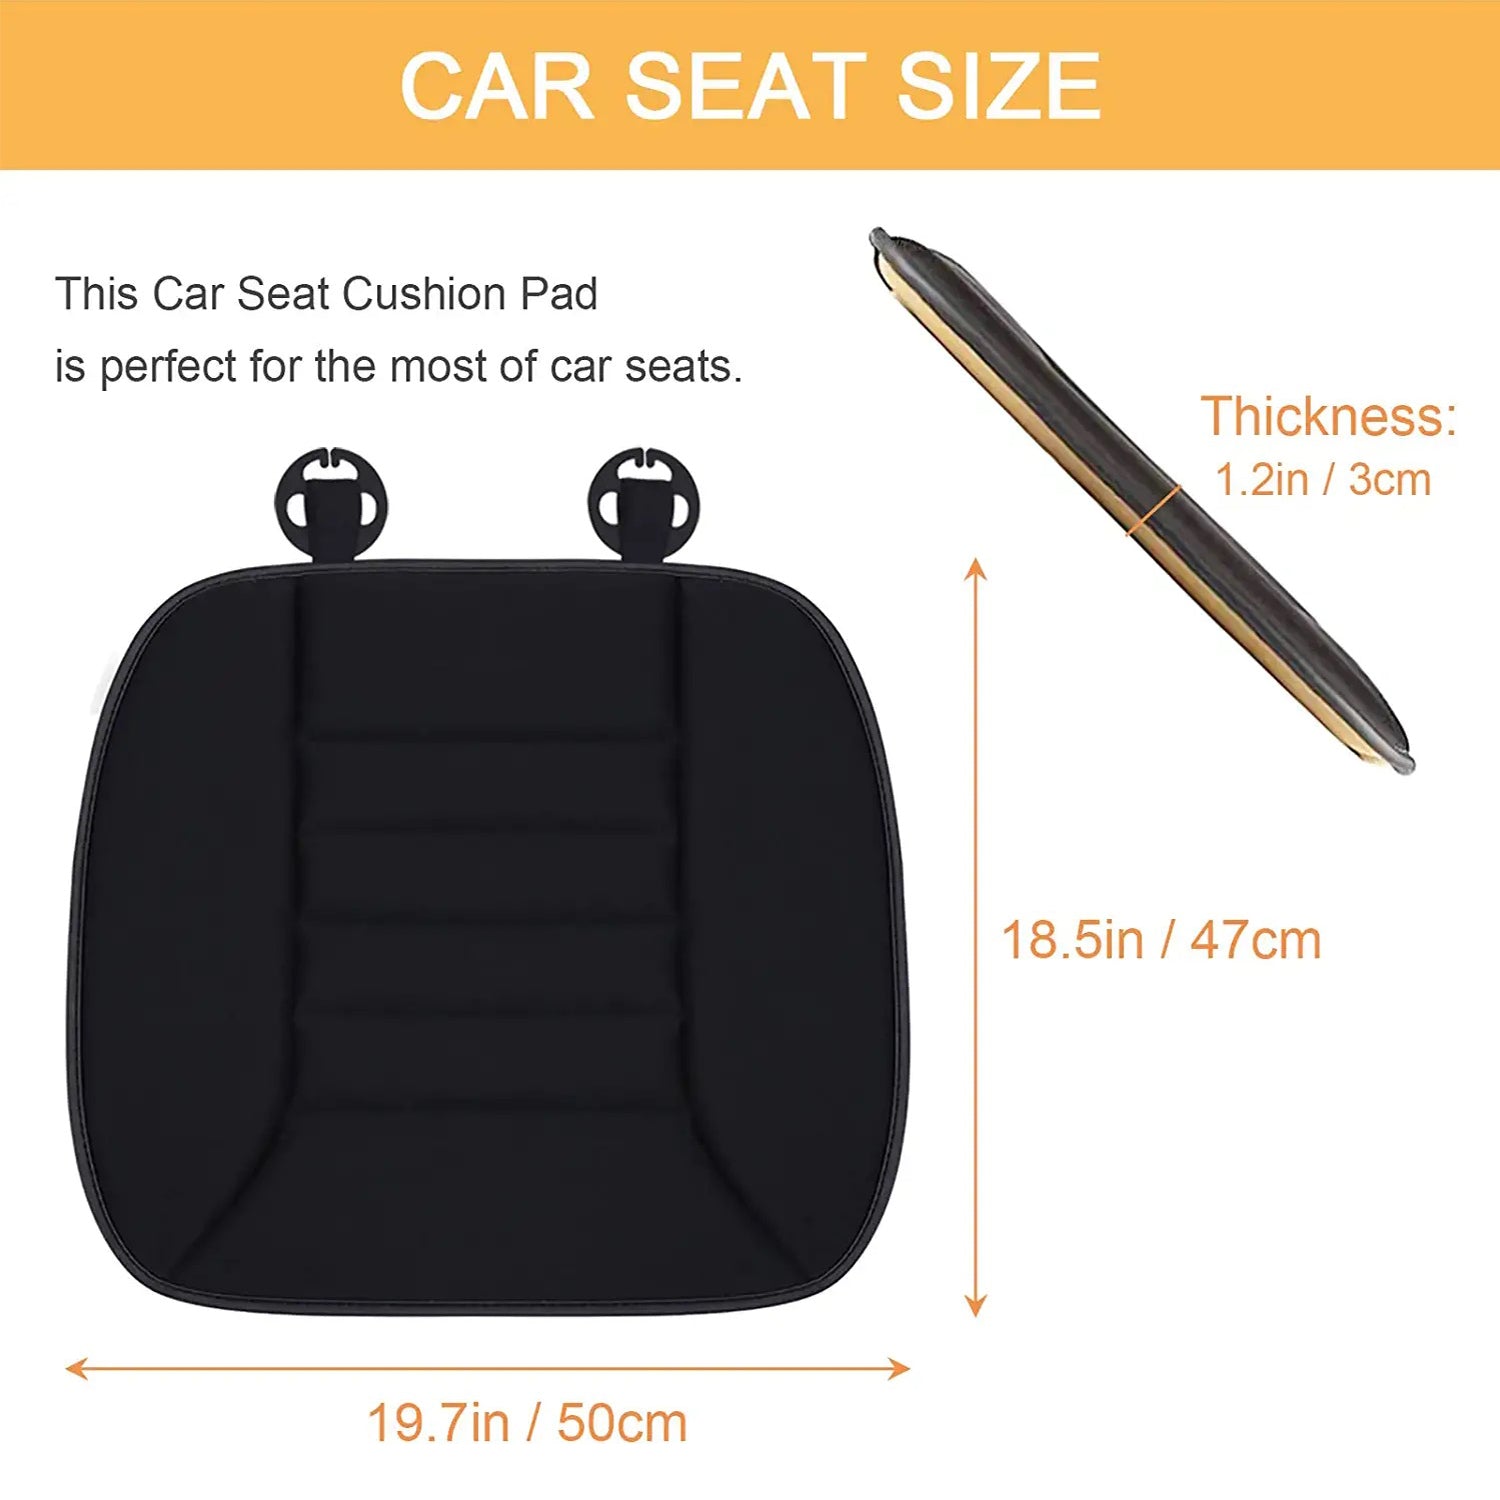 Car Seat Cushion with 1.2inch Comfort Memory Foam, Custom-Fit For Car, Seat Cushion for Car and Office Chair DLTS247